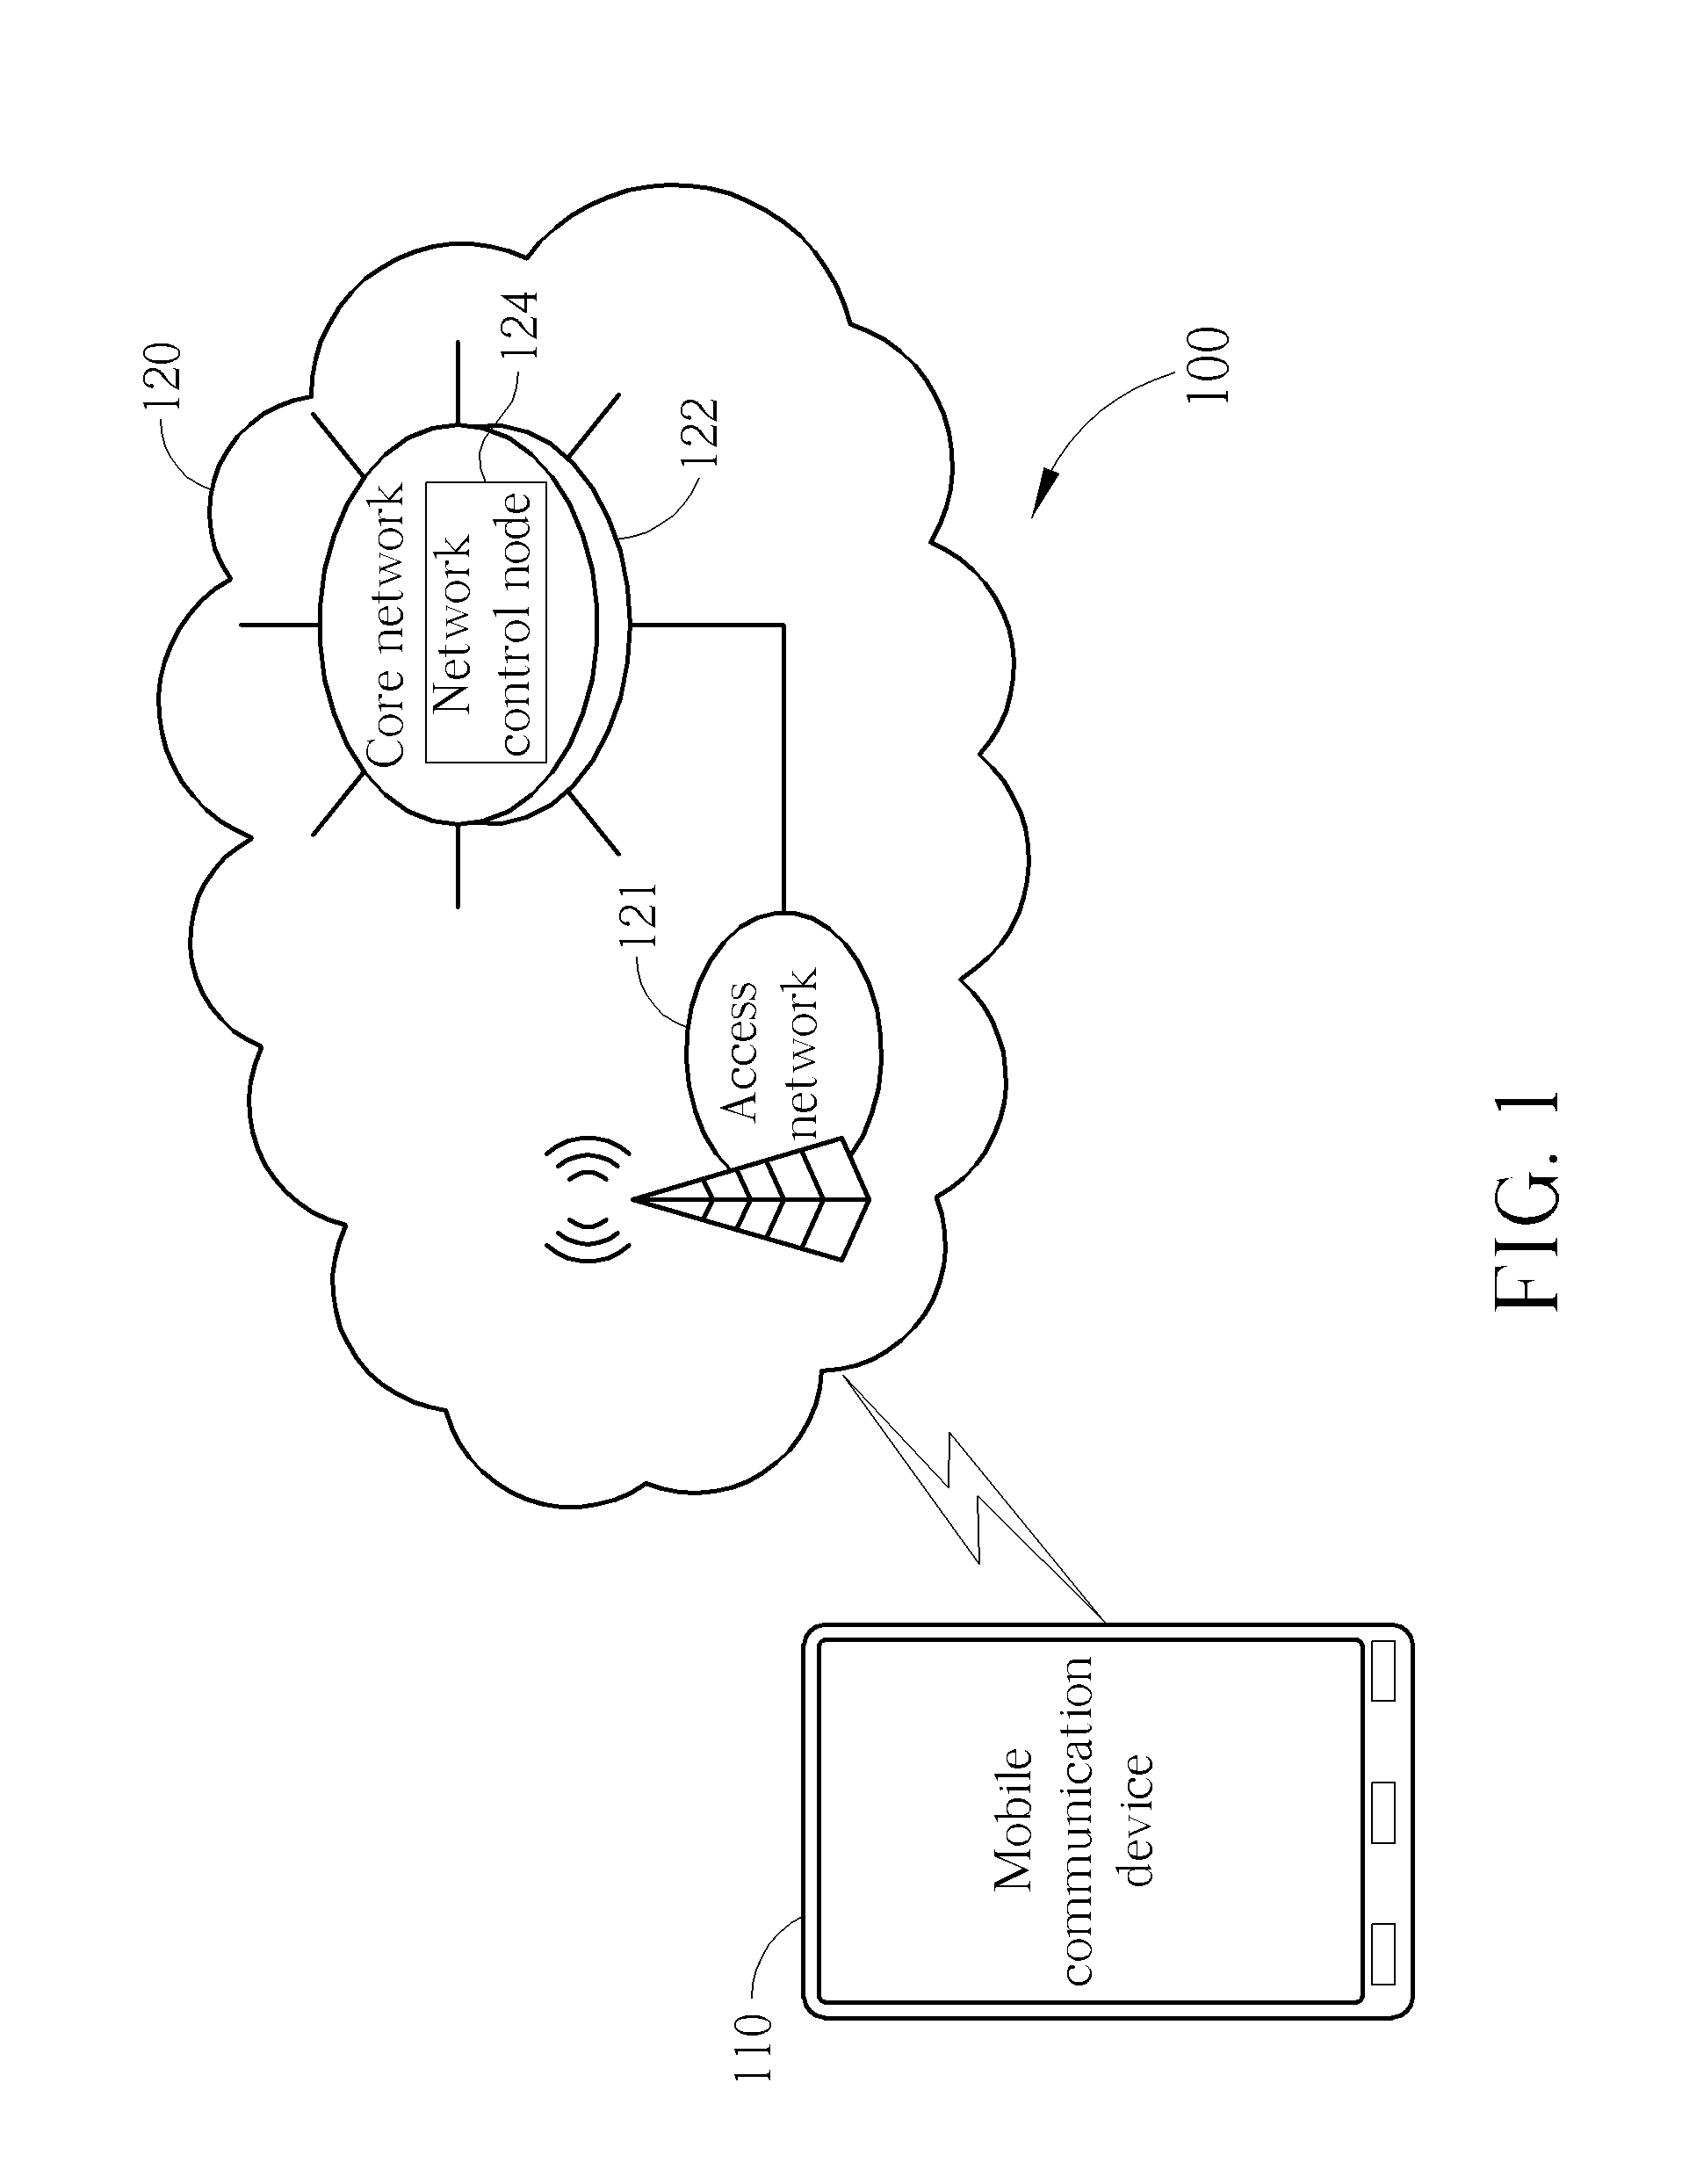 Method of Handling Singling in Congested Core Network